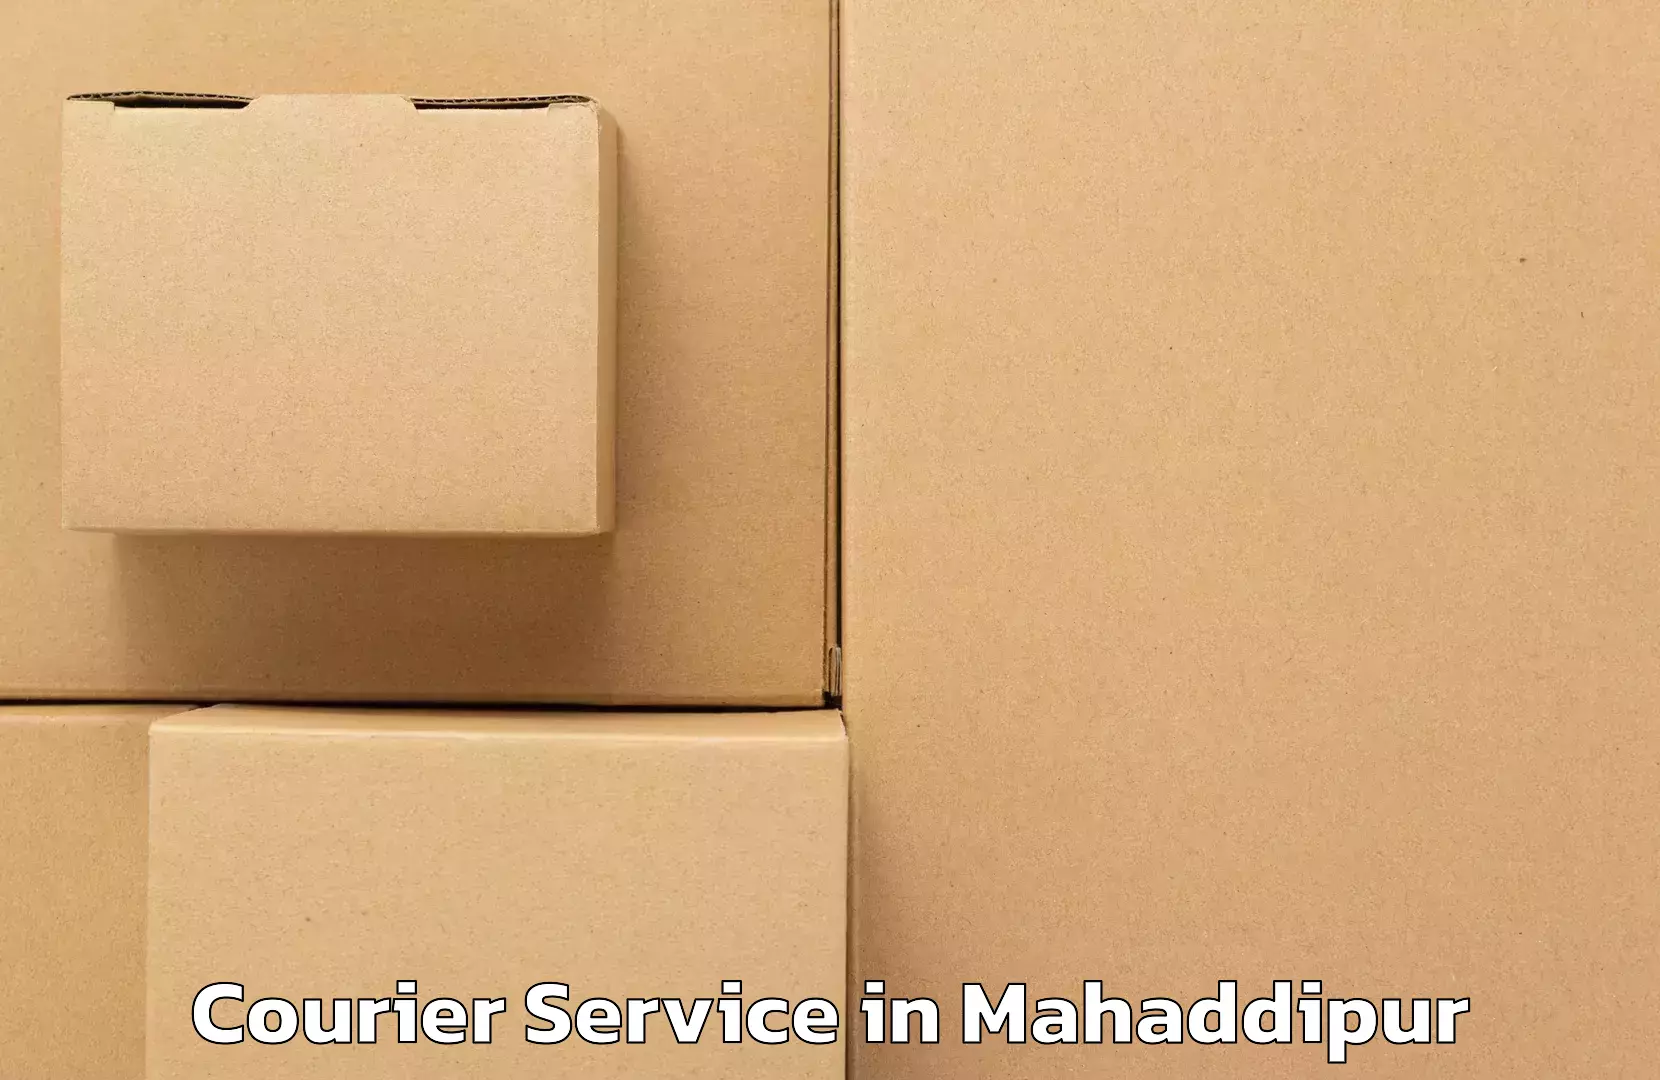 Weekend courier service in Mahaddipur